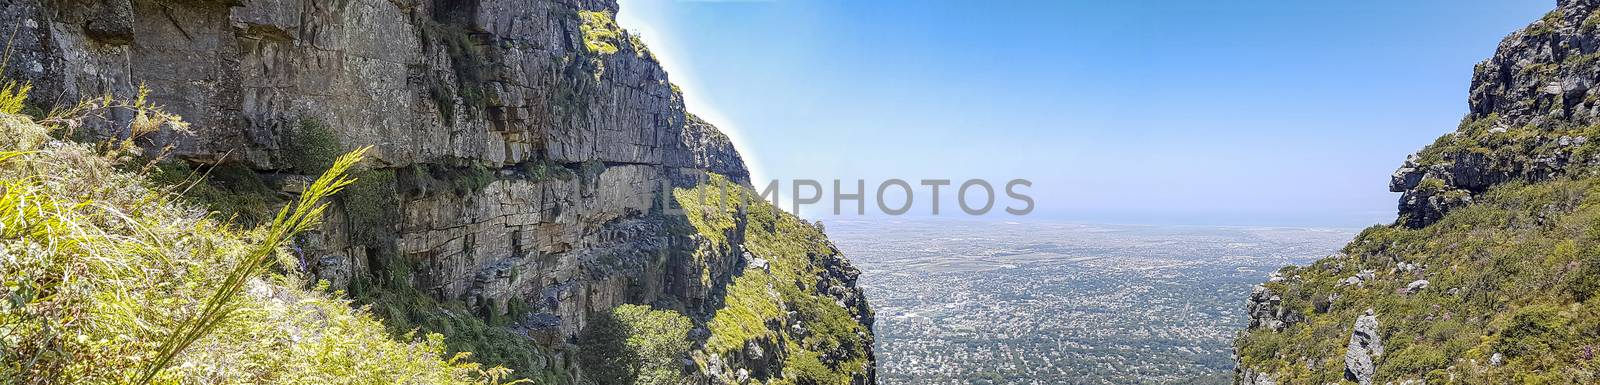 Amazing view from Table Mountain National Park in Cape Town to the Claremont area in South Africa.